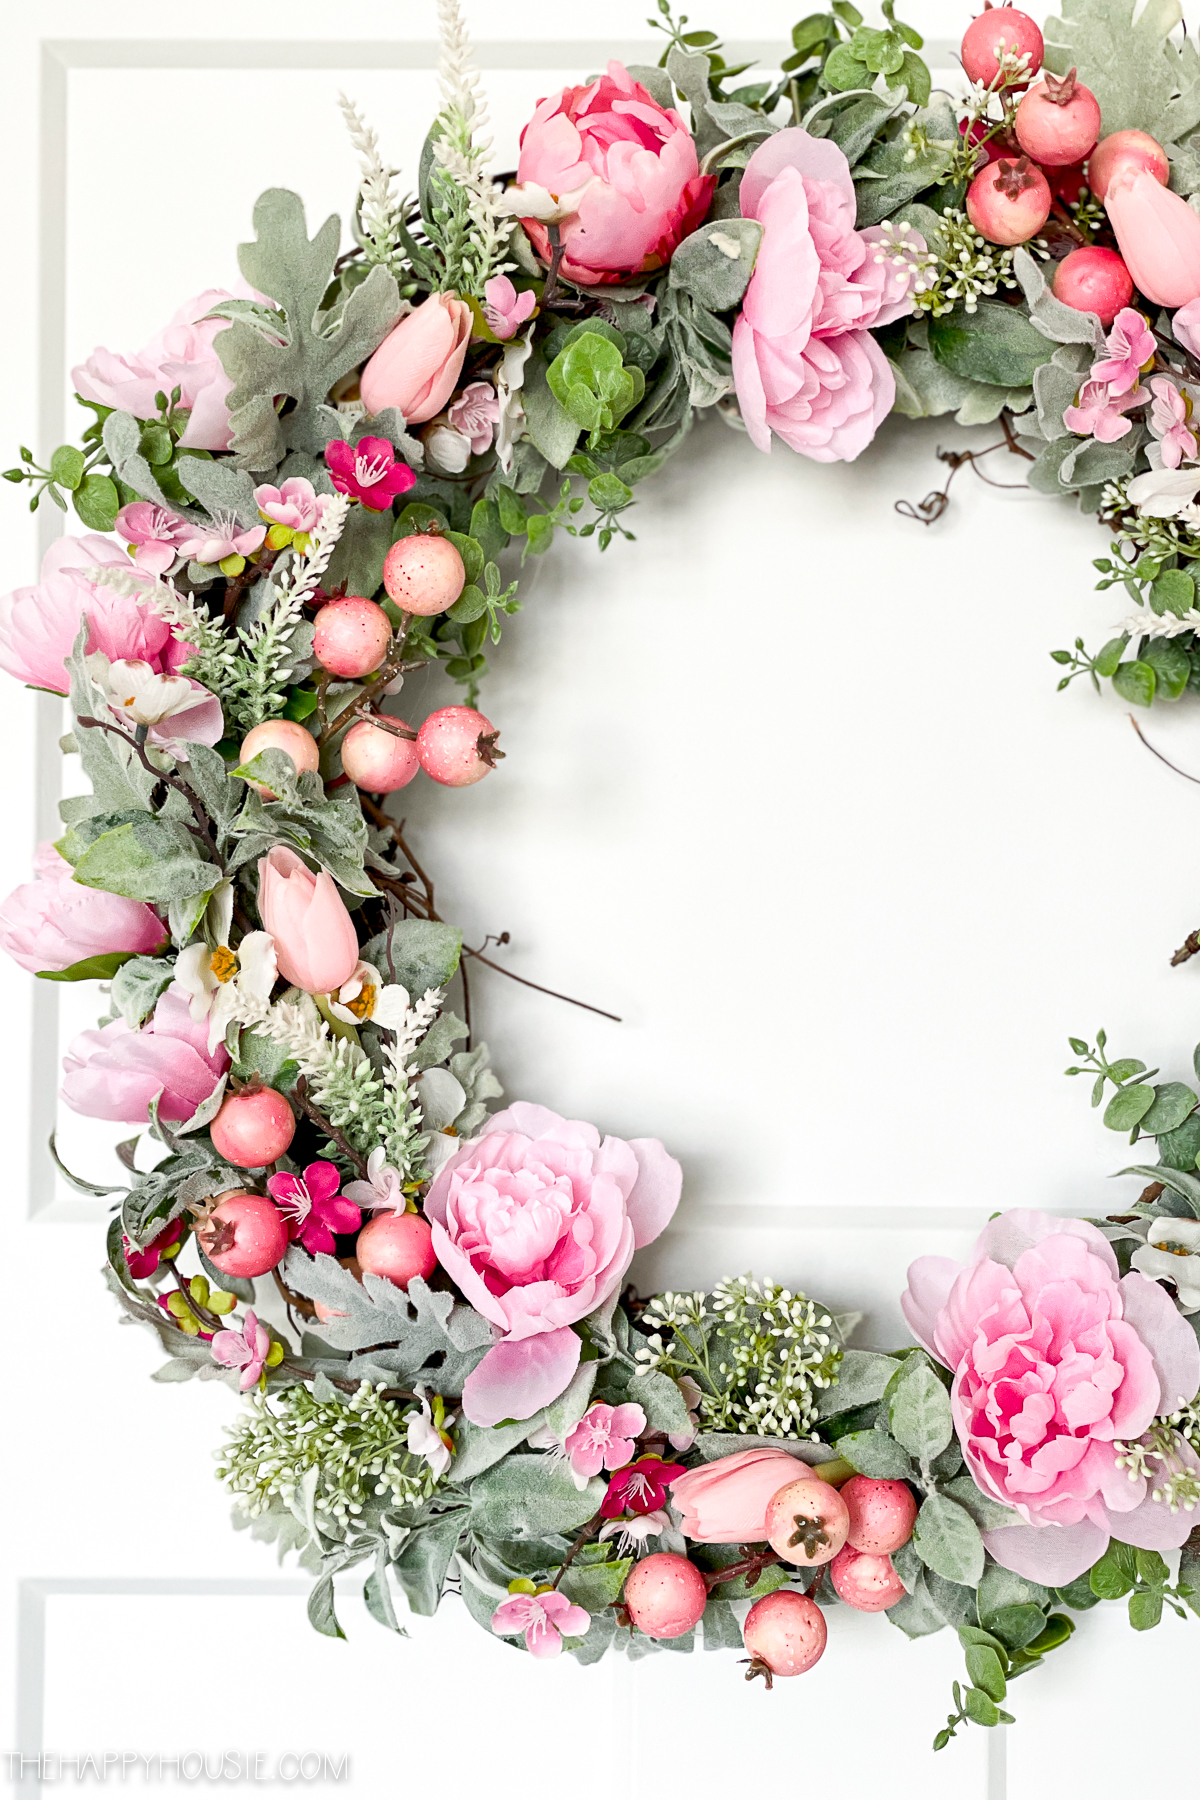 13 spring wreath ideas for your front door in 2023: Let Stacey